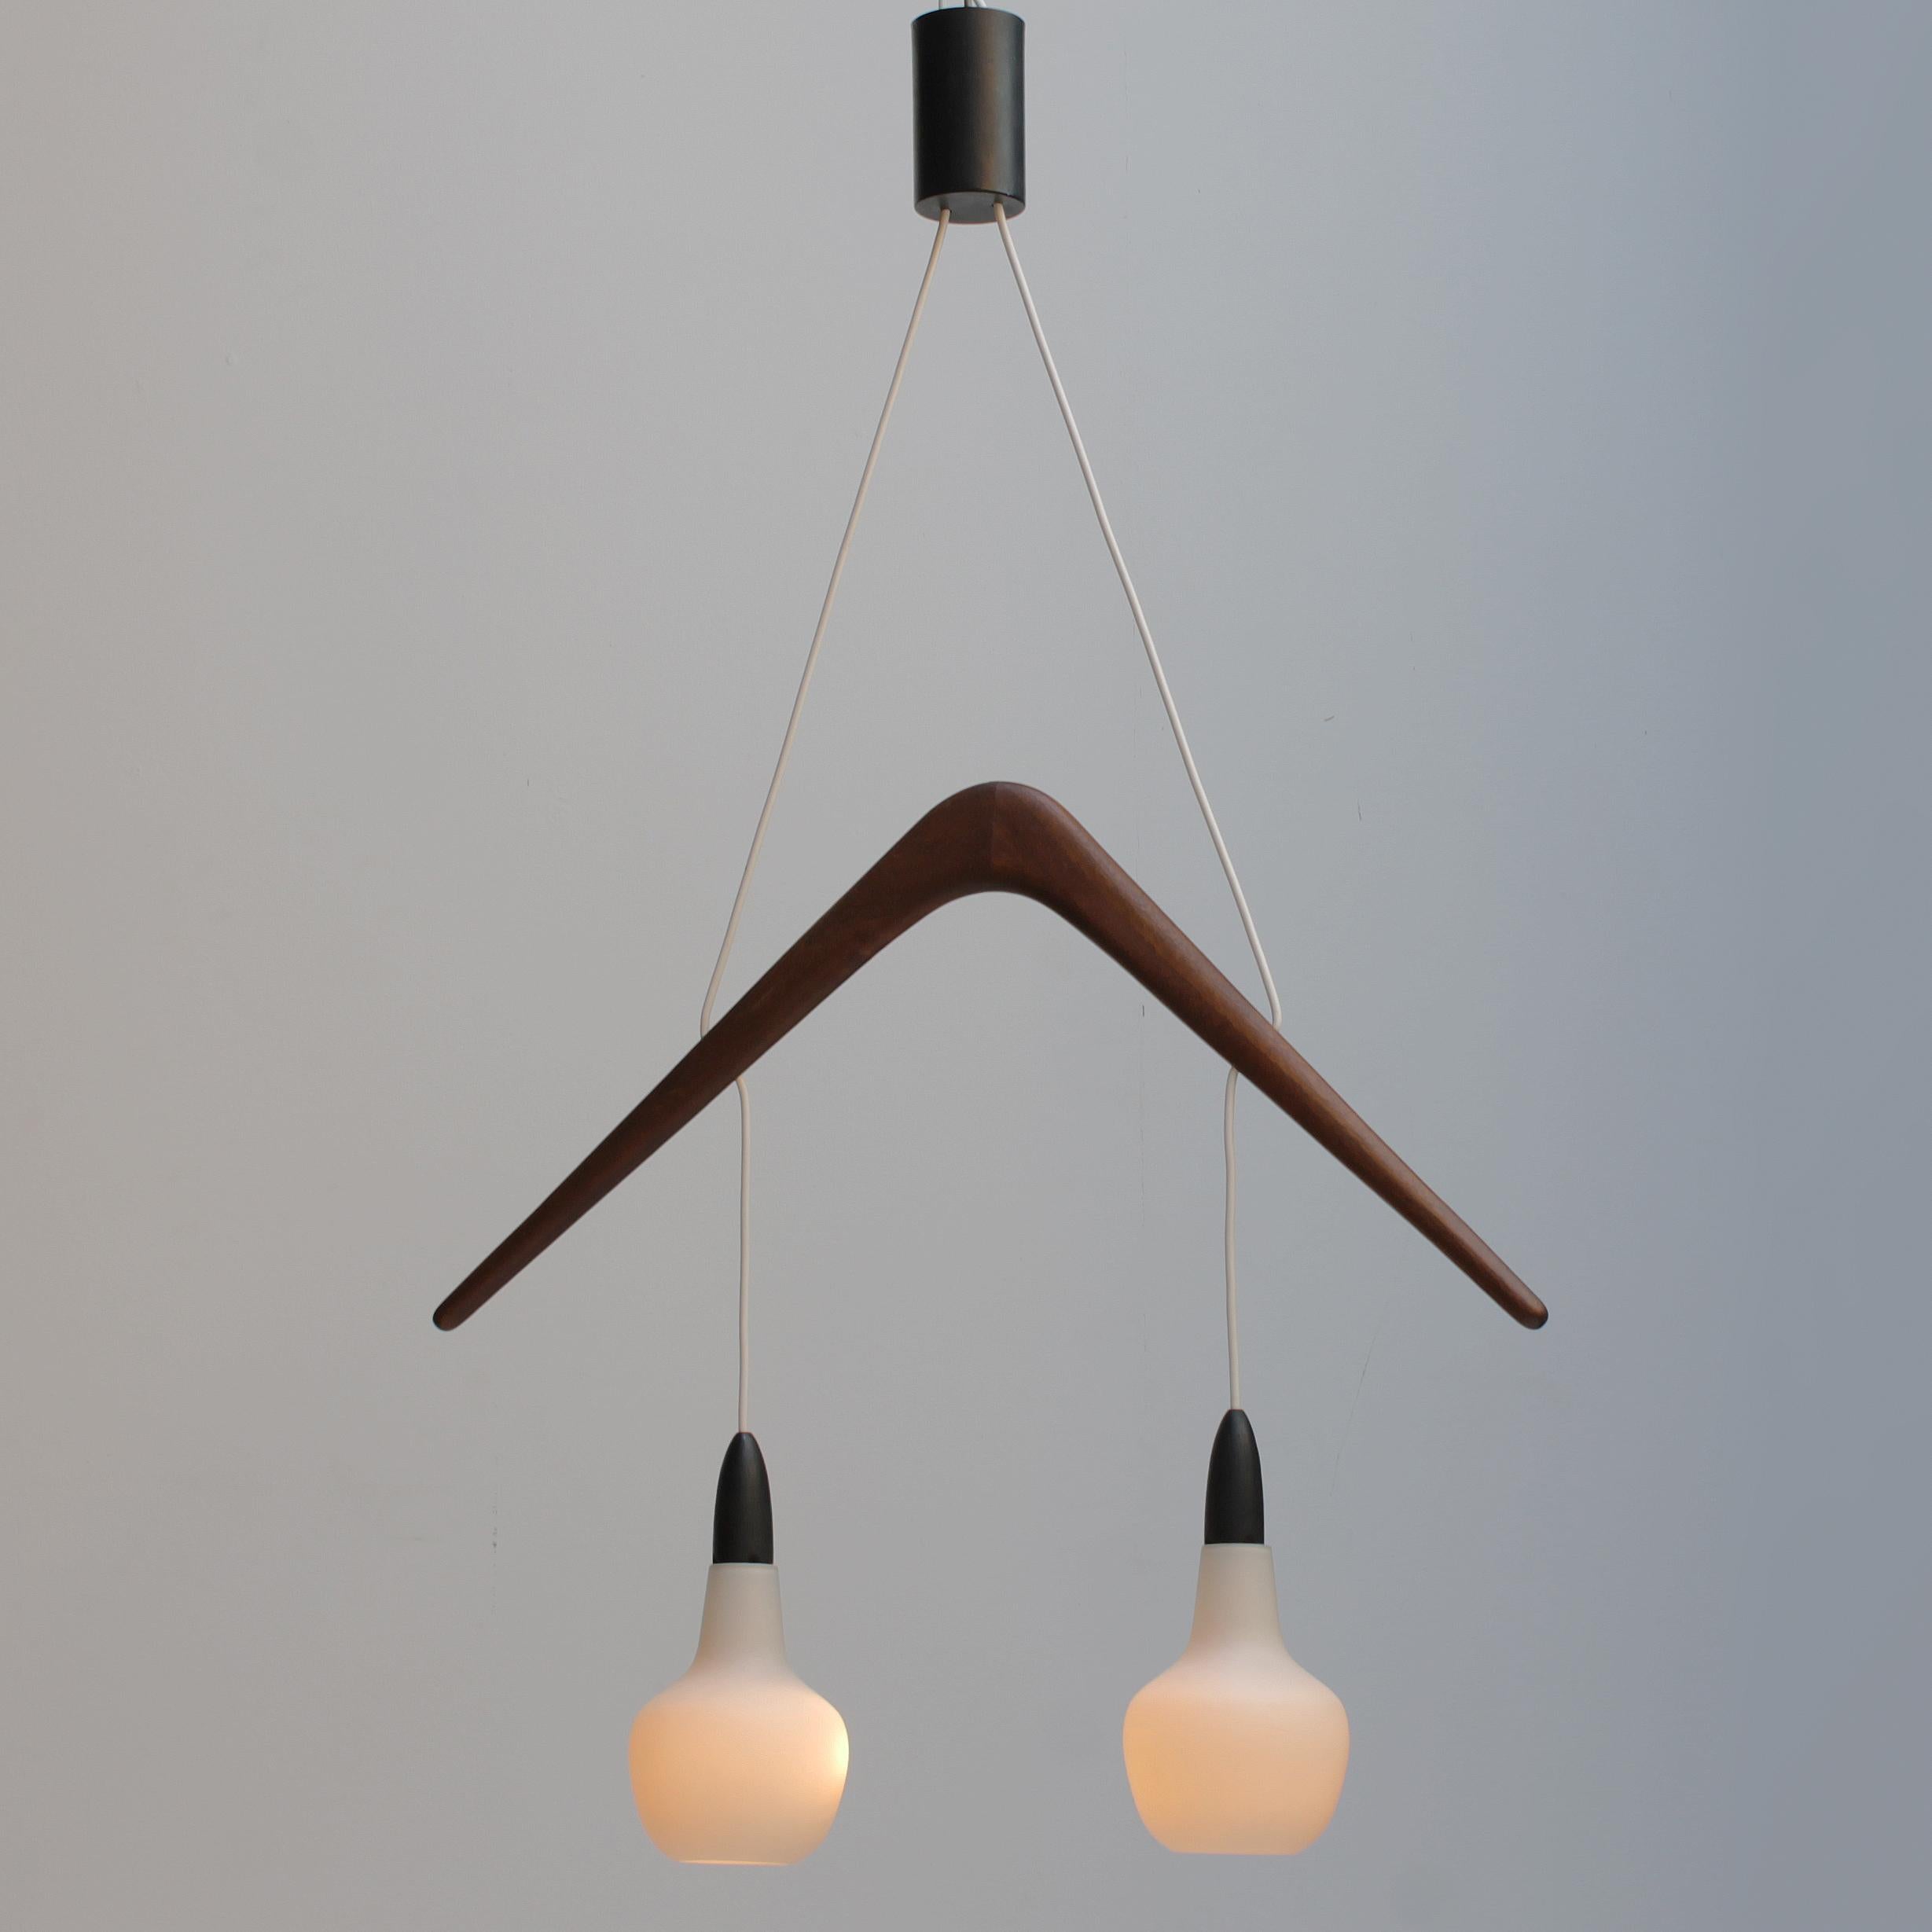 Rare chandelier 'Boomerang by Rispal France, circa 1955.
Pair of Opaline glass pendants with the 'boomerang' in France walnut.
Original bayonet bulbs (BA15d, IEC 7004-11 A, DIN 49720) max 60 watt. The wire and the sockets are in a good condition,